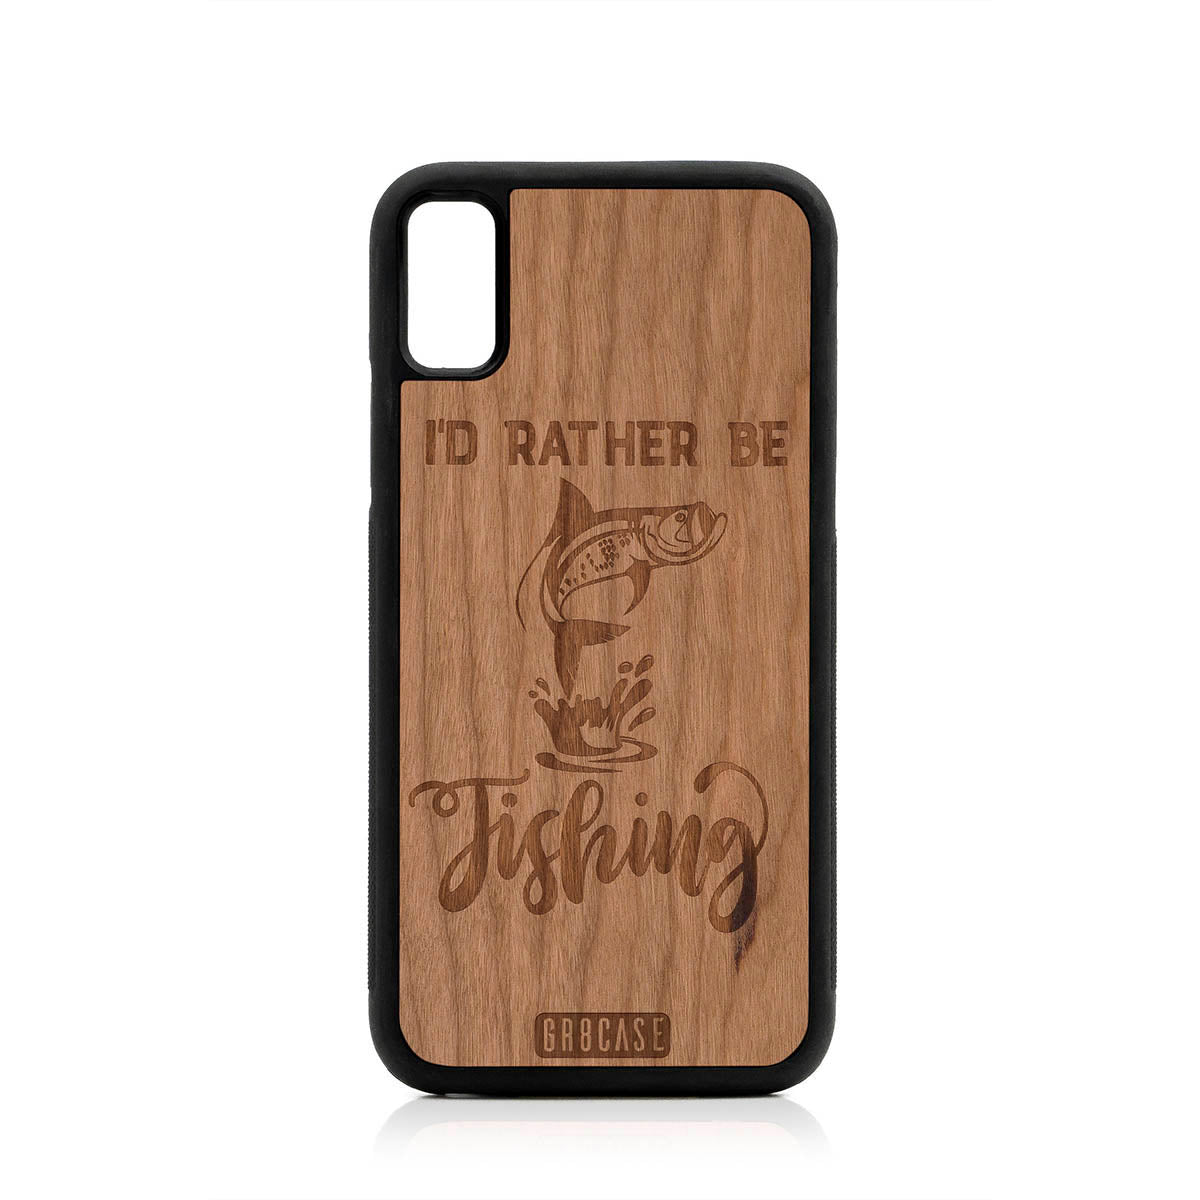 I'D Rather Be Fishing Design Wood Case For iPhone X/XS